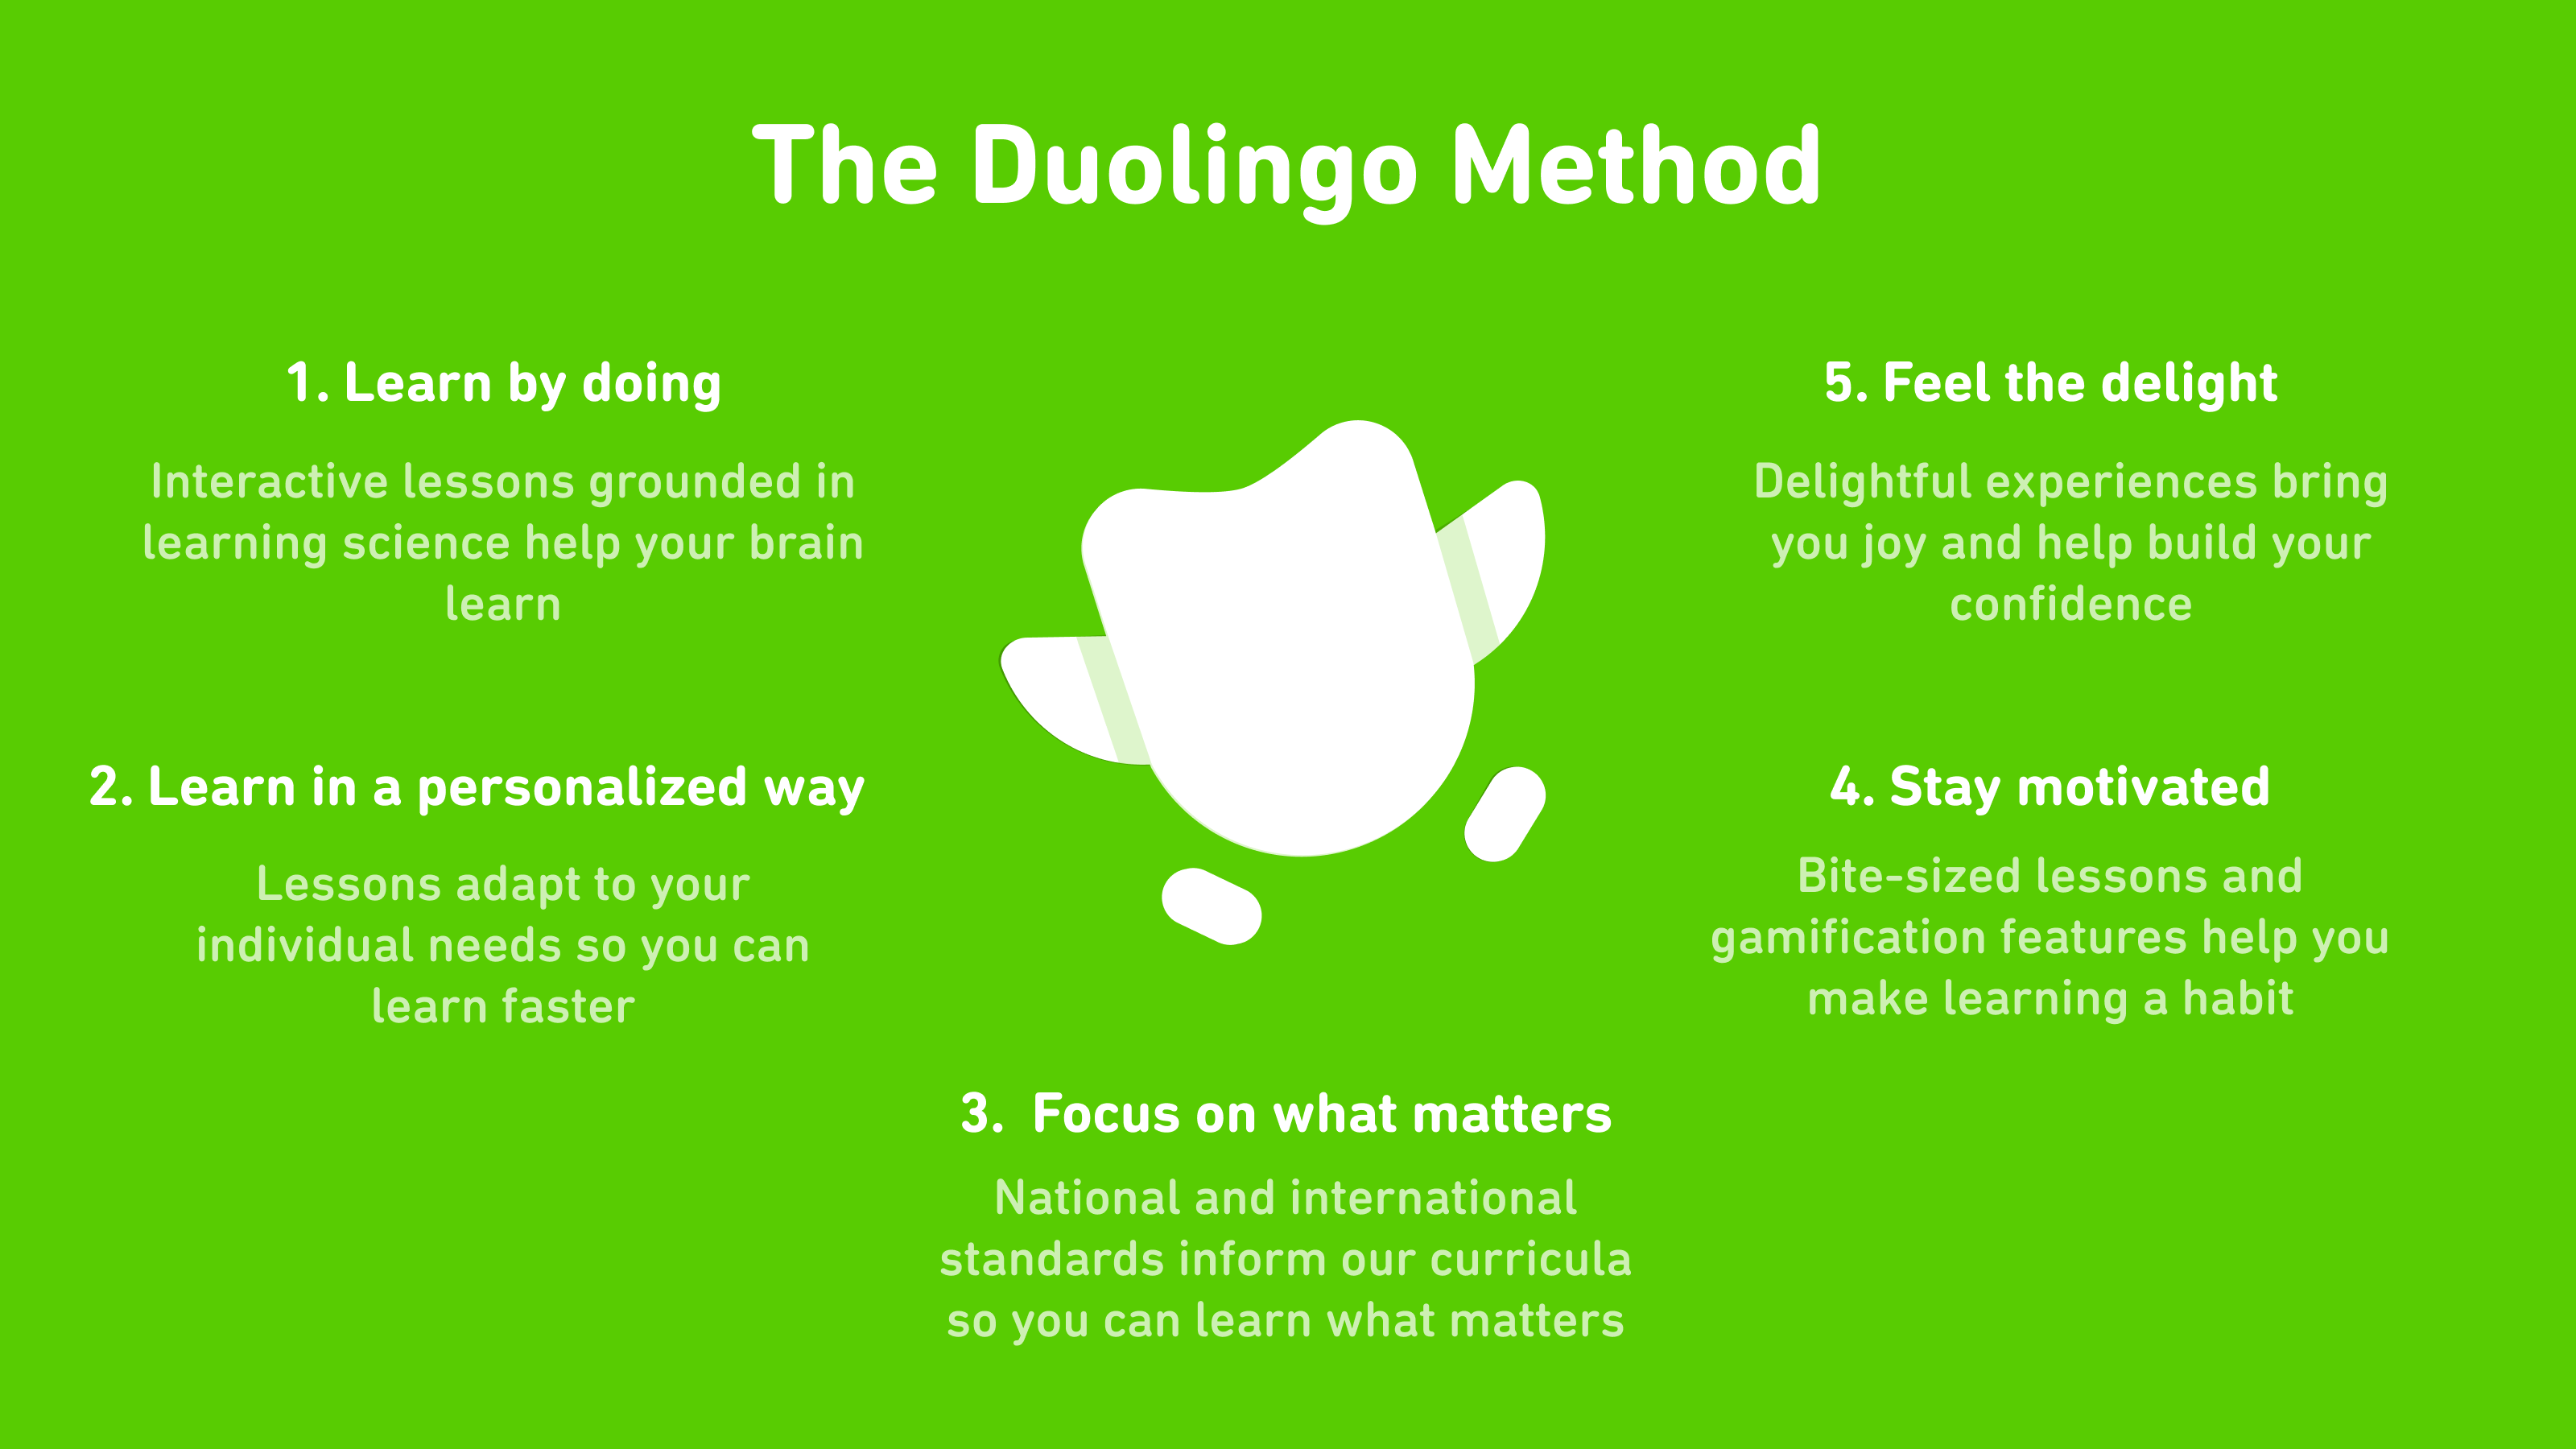 a visual enumeration of the five elements of the Duolingo Method with Duo in the center. They are 1. Learn by doing. Interactive lessons grounded in learning science help your brain learn. 2. Learn in a personalized way. Lessons adapt to your individual needs so you can learn faster. 3. Focus on what matters. National and international standards inform our curricula so you can learn what matters. 4. Stay motivated. Bite-sized lessons and gamification features help you make learning a habit. 5. Feel the delight. Delightful experiences bring you joy and help build you confidence.